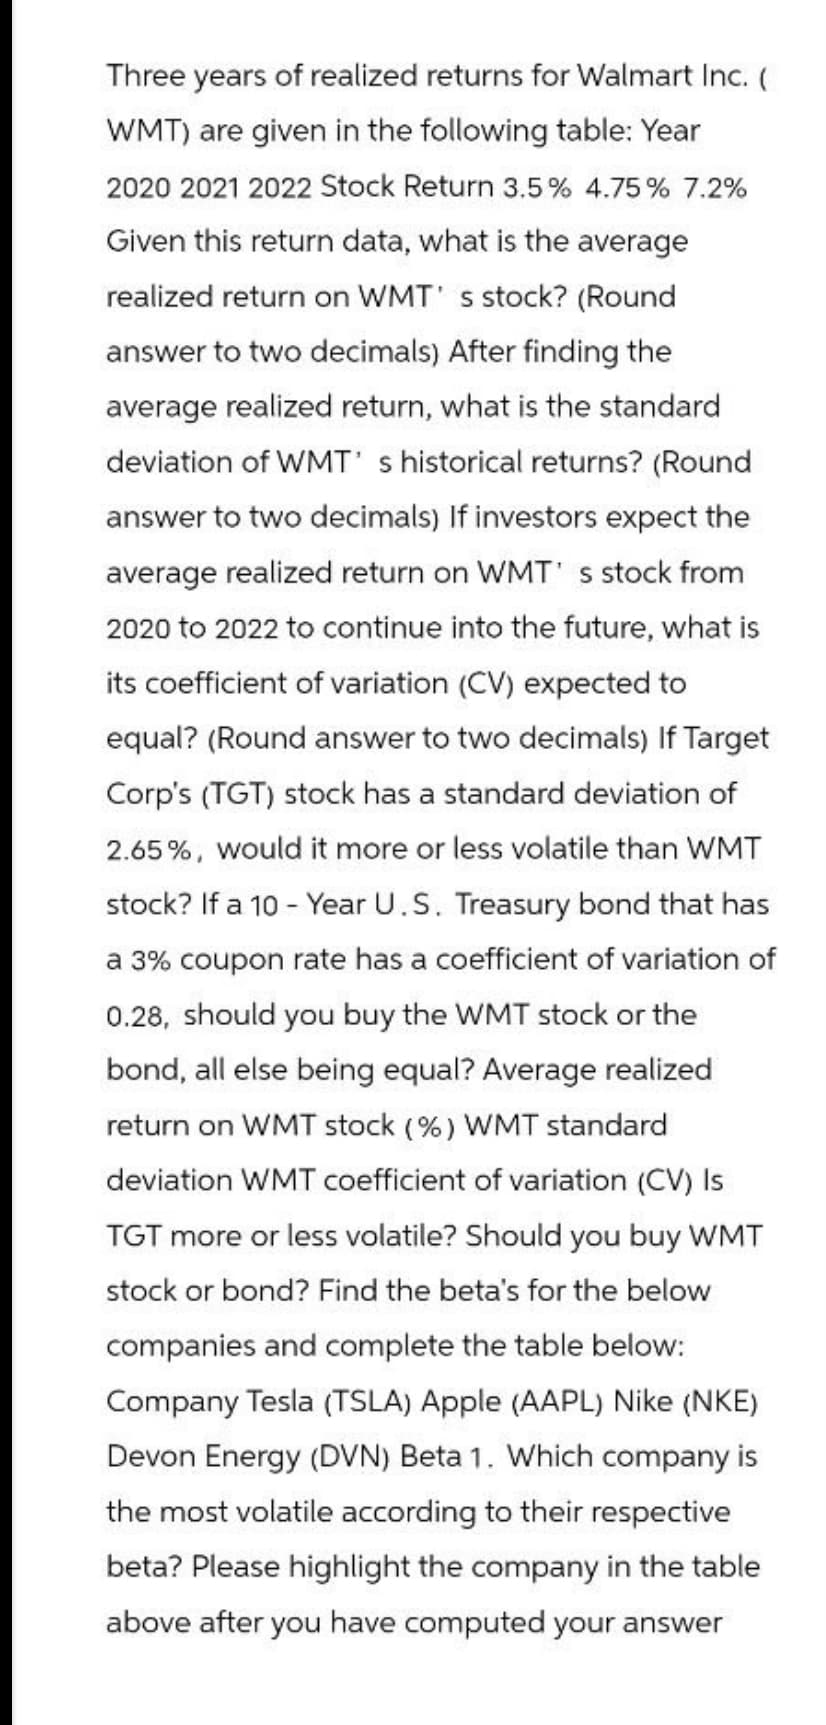 Three years of realized returns for Walmart Inc. (
WMT) are given in the following table: Year
2020 2021 2022 Stock Return 3.5% 4.75% 7.2%
Given this return data, what is the average
realized return on WMT' s stock? (Round
answer to two decimals) After finding the
average realized return, what is the standard
deviation of WMT's historical returns? (Round
answer to two decimals) If investors expect the
average realized return on WMT's stock from
2020 to 2022 to continue into the future, what is
its coefficient of variation (CV) expected to
equal? (Round answer to two decimals) If Target
Corp's (TGT) stock has a standard deviation of
2.65%, would it more or less volatile than WMT
stock? If a 10-Year U.S. Treasury bond that has
a 3% coupon rate has a coefficient of variation of
0.28, should you buy the WMT stock or the
bond, all else being equal? Average realized
return on WMT stock (%) WMT standard
deviation WMT coefficient of variation (CV) Is
TGT more or less volatile? Should you buy WMT
stock or bond? Find the beta's for the below
companies and complete the table below:
Company Tesla (TSLA) Apple (AAPL) Nike (NKE)
Devon Energy (DVN) Beta 1. Which company is
the most volatile according to their respective
beta? Please highlight the company in the table
above after you have computed your answer